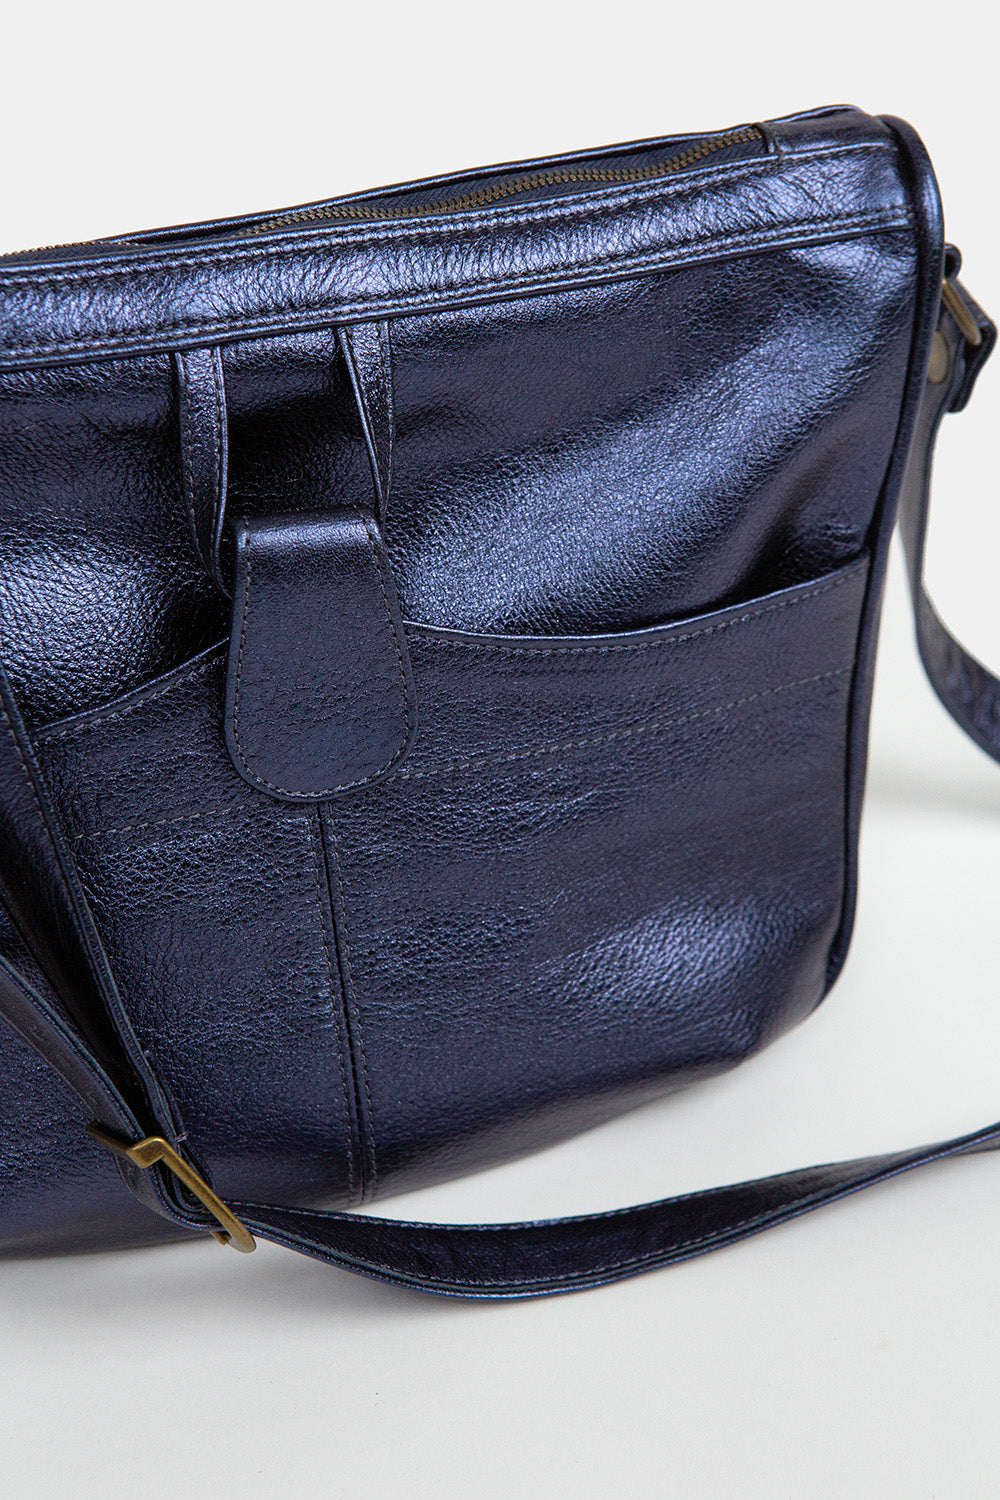 Twiggy Leather Shoulder Bag in Sapphire